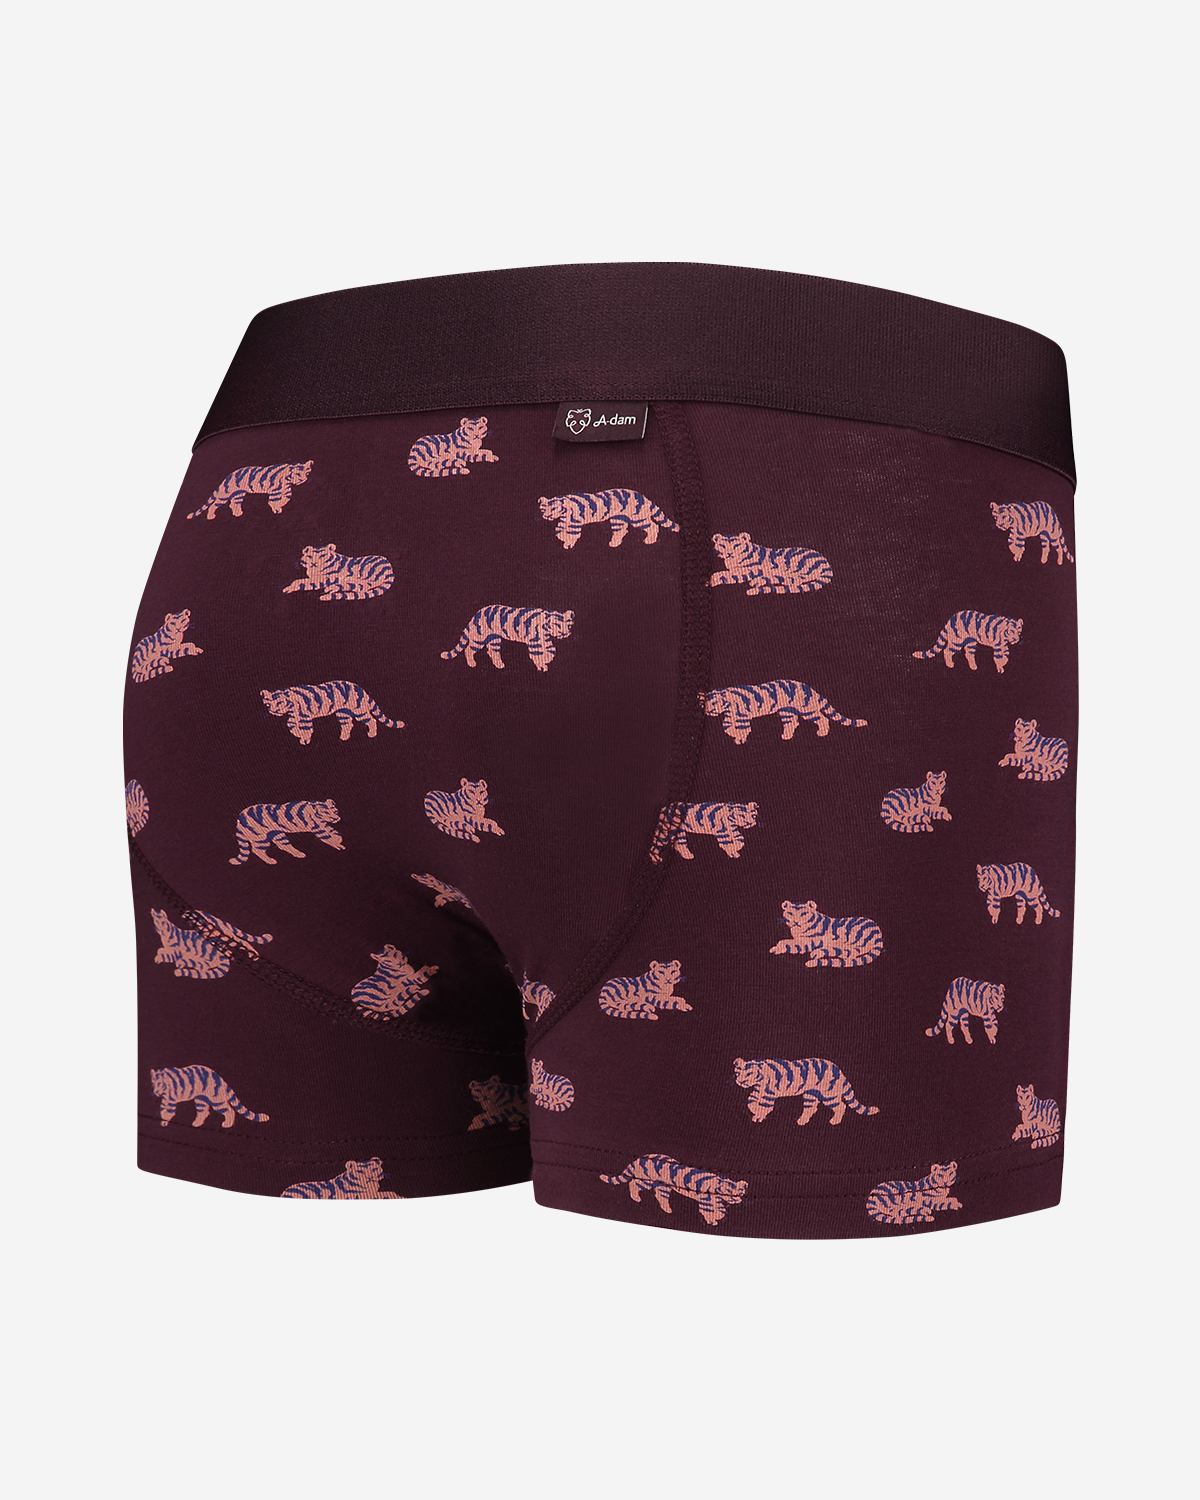 A-dam Boys Boxer briefs with purple tigers from GOTS organic